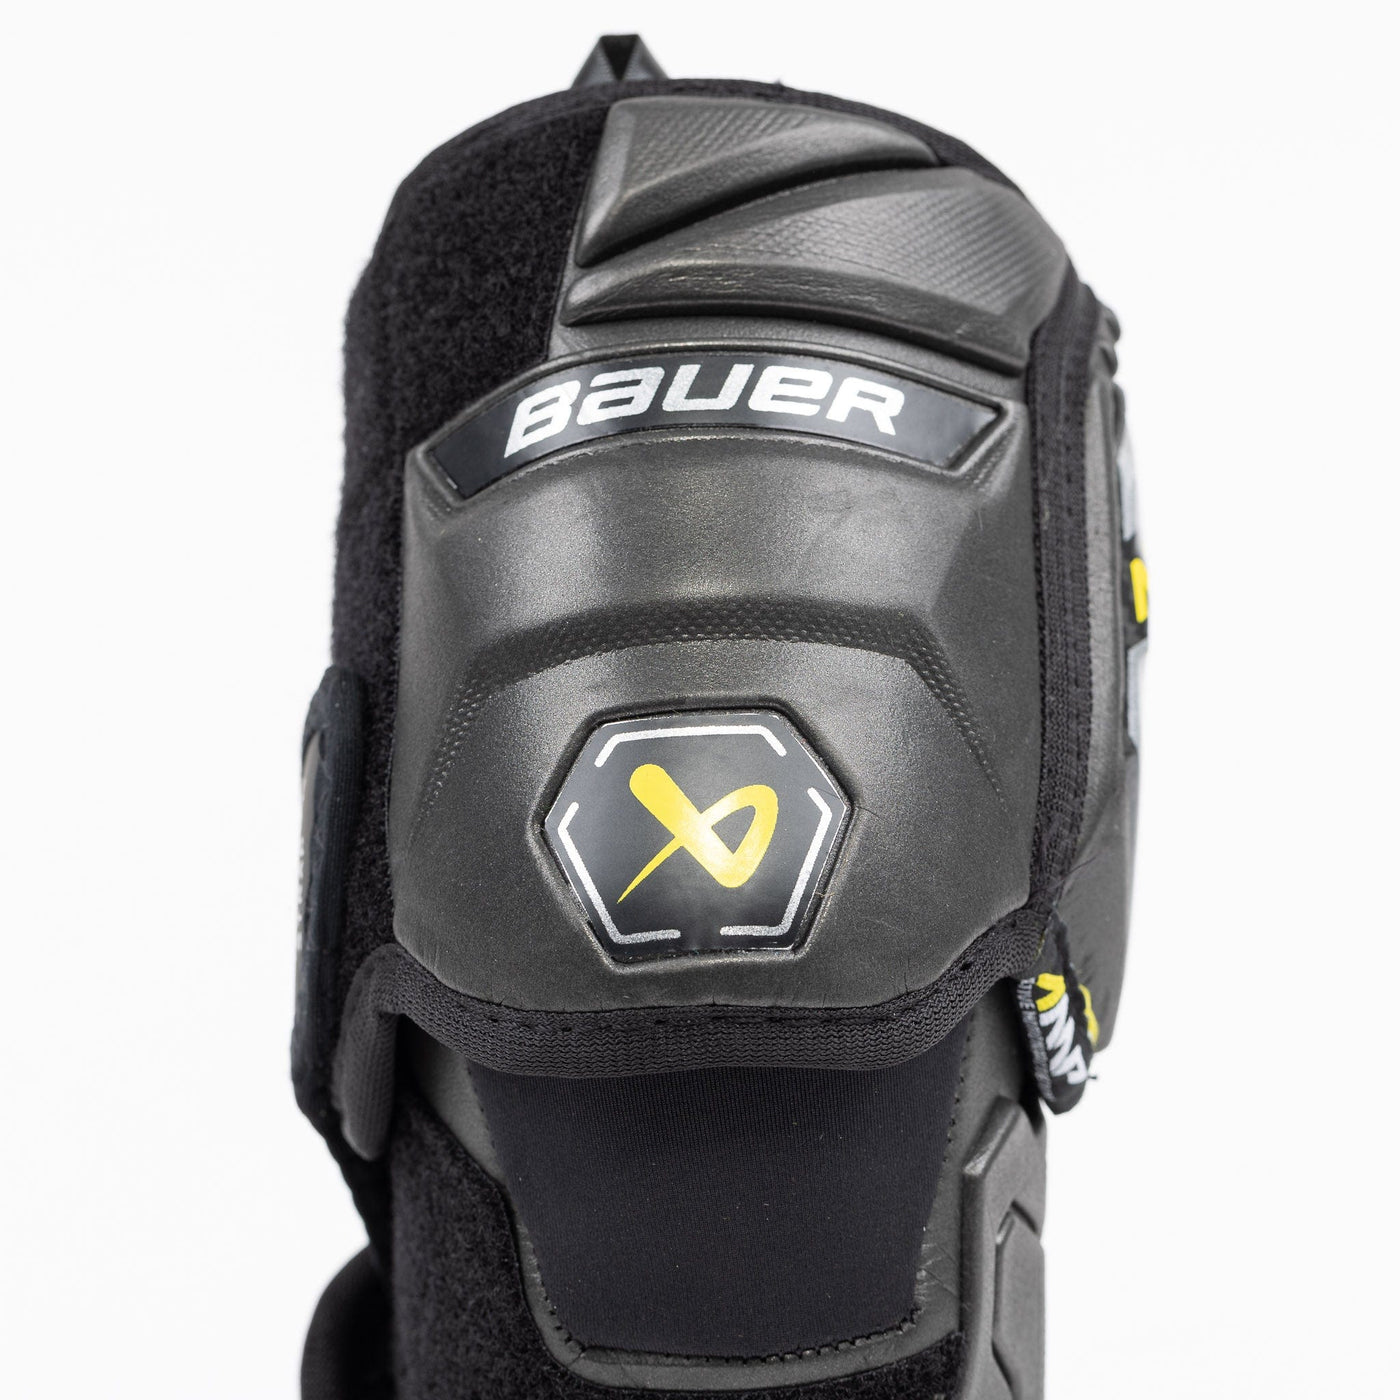 Bauer Supreme Mach Junior Hockey Elbow Pads - The Hockey Shop Source For Sports